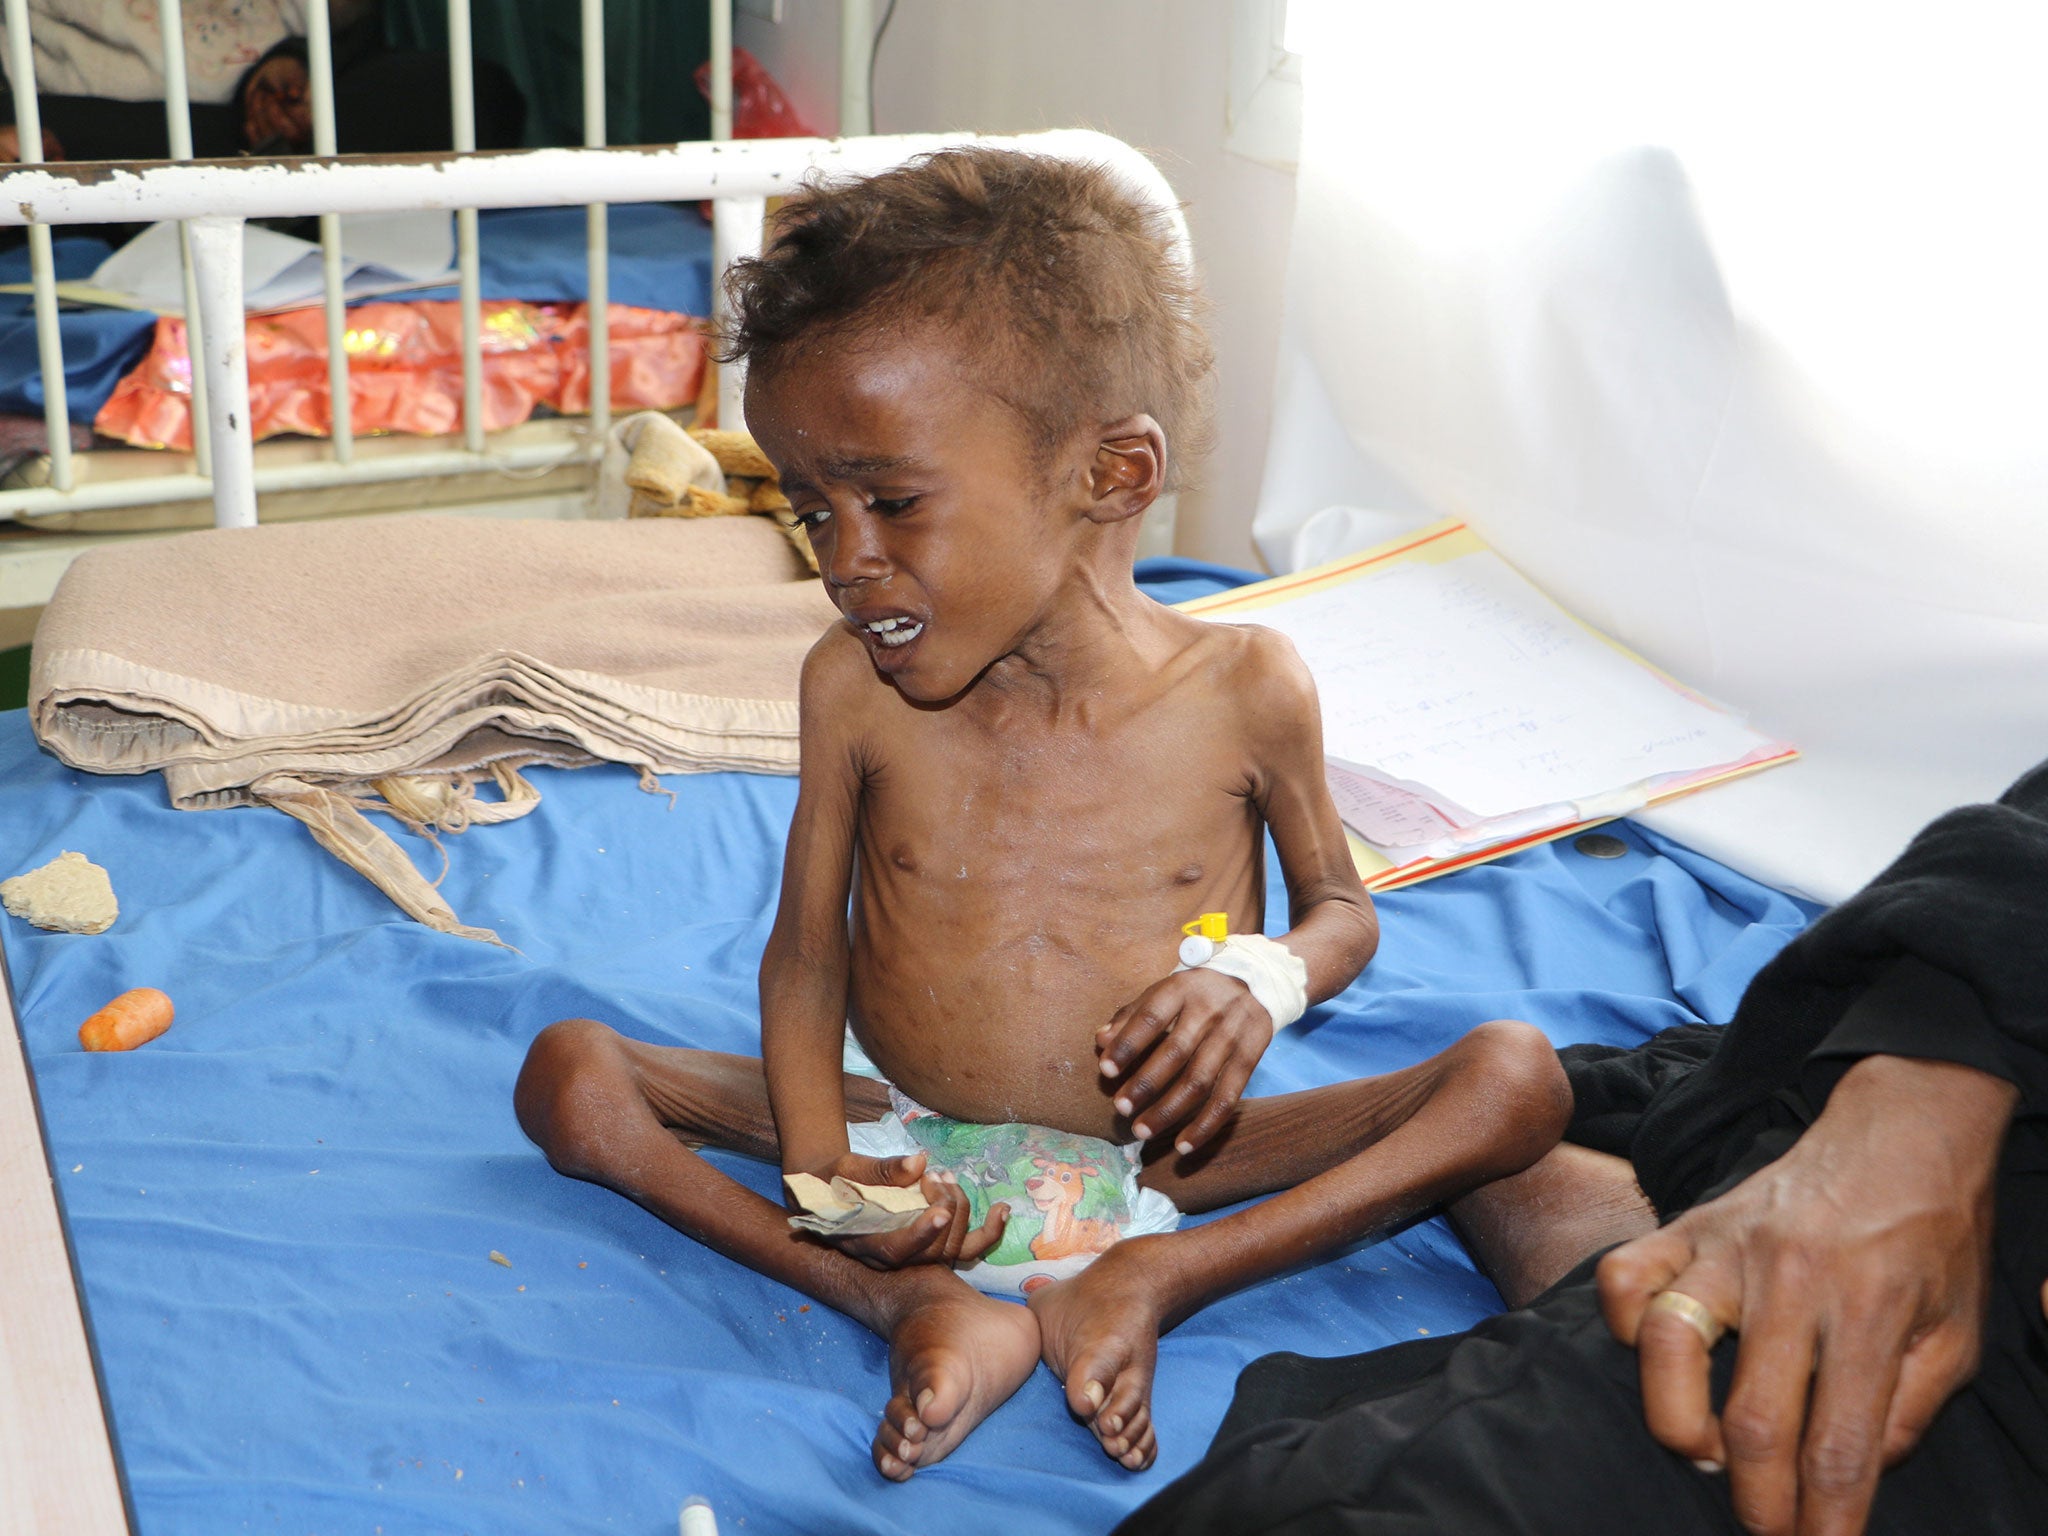 As many as 460,000 children face severe malnutrition in Yemen and 70 per cent of the population struggle to feed themselves